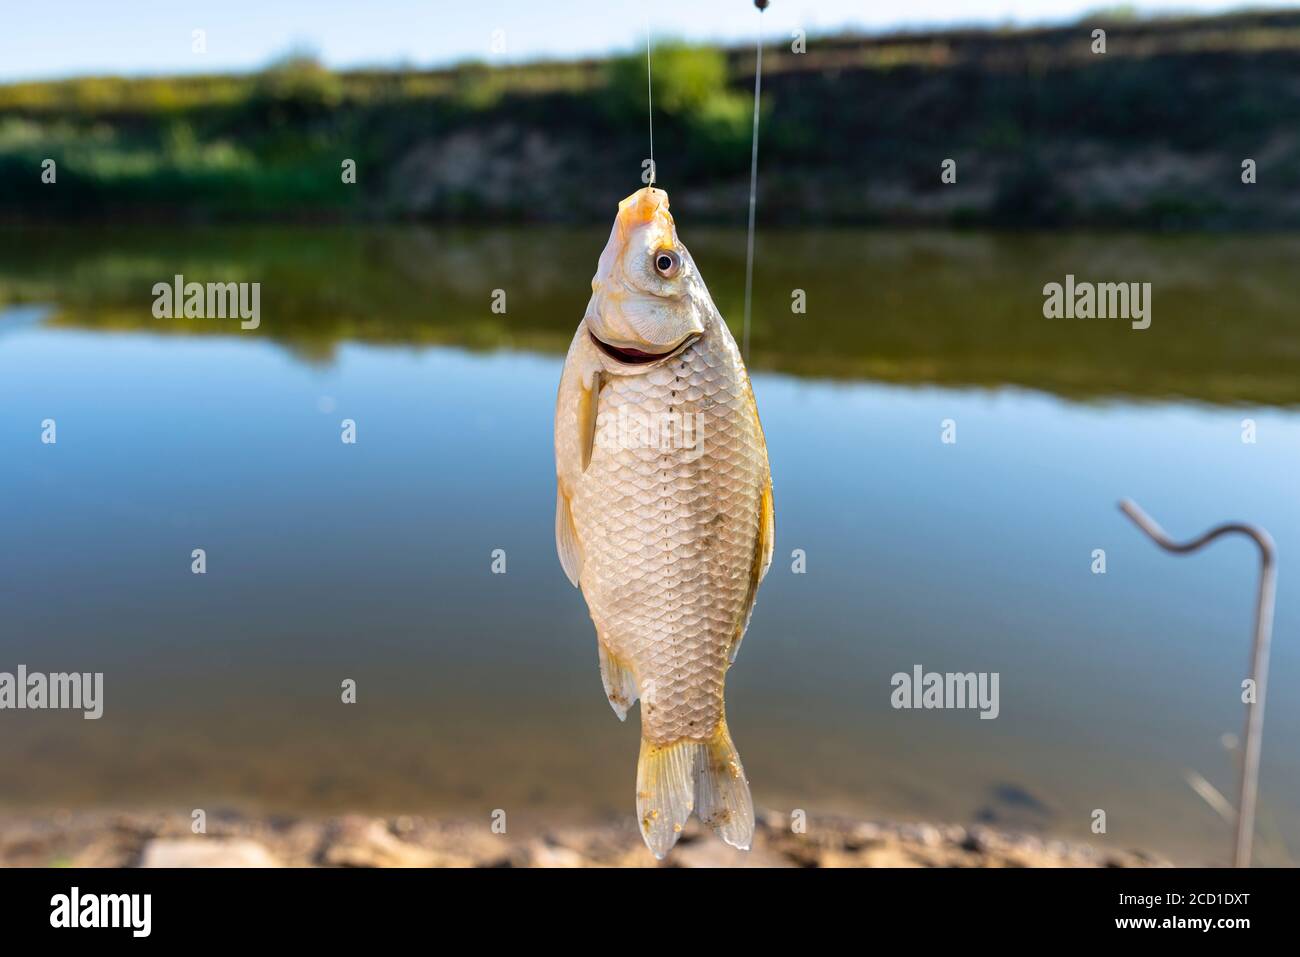 Crucian fish caught on bait by the lake, hanging on a hook on a